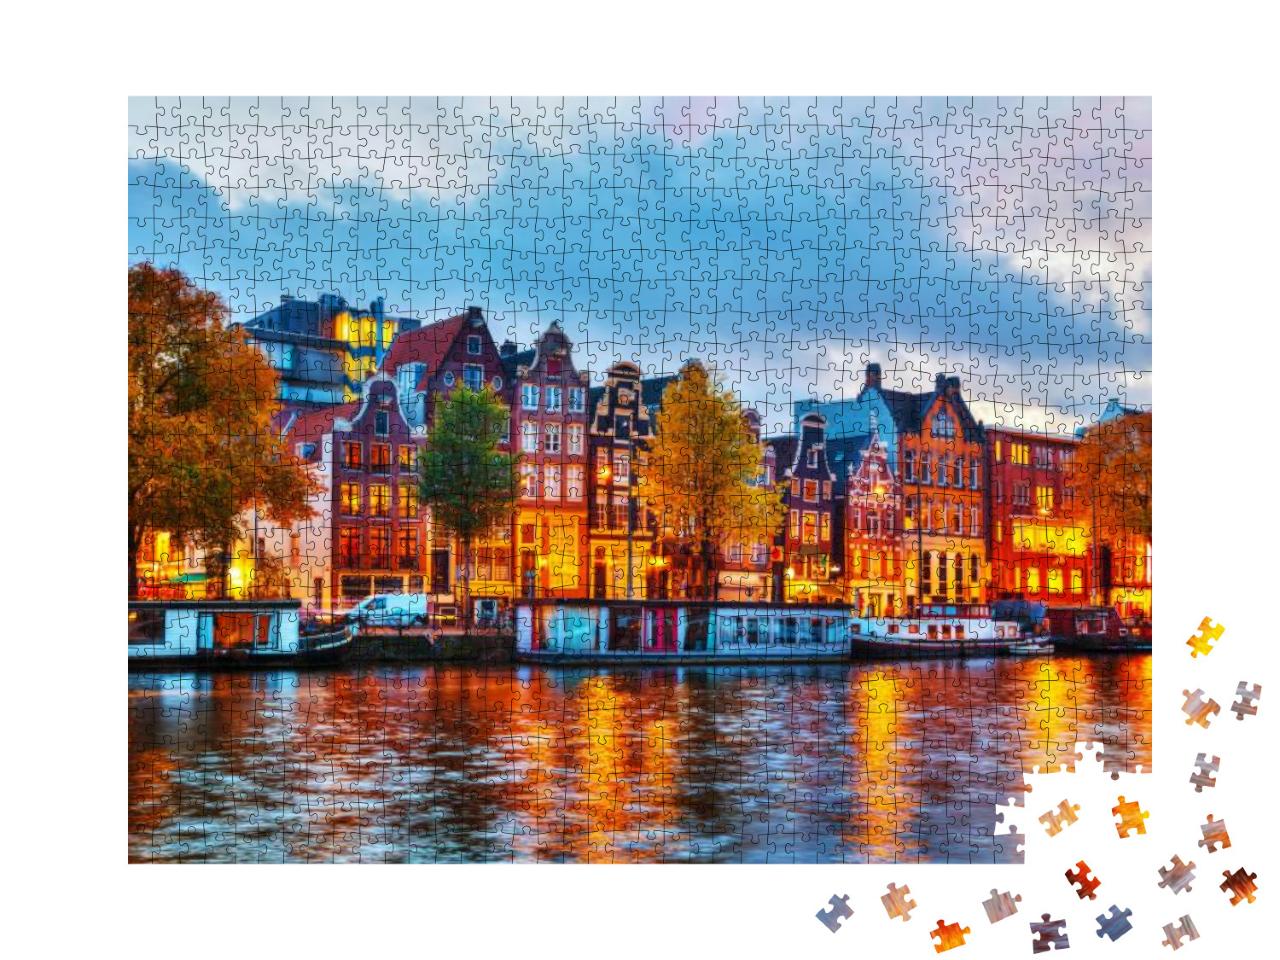 Amsterdam City View with Amstel River At Sunset... Jigsaw Puzzle with 1000 pieces